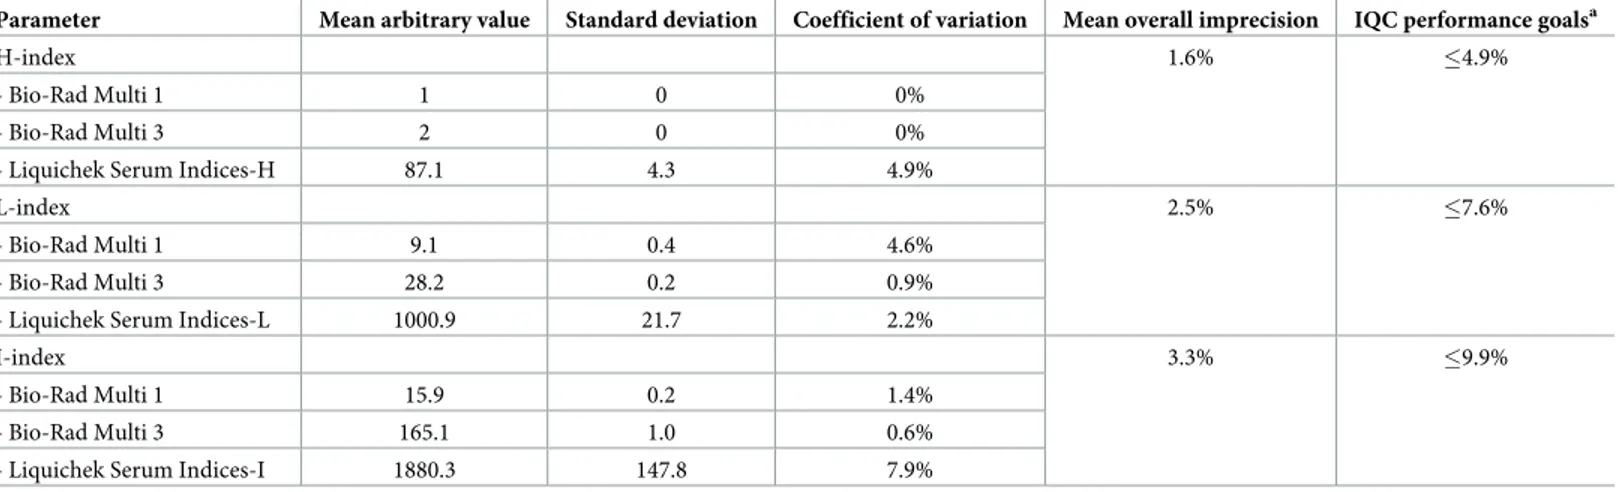 Table 3. Inter-assay imprecision (n = 7, over 29 days) and internal quality control (IQC) performance goals of HIL (Hemolysis, H; Icterus, I; Lipaemia, L) indices on Roche Cobas c702, calculated using liquid Bio-Rad Multi 1 and 3 quality control materials 